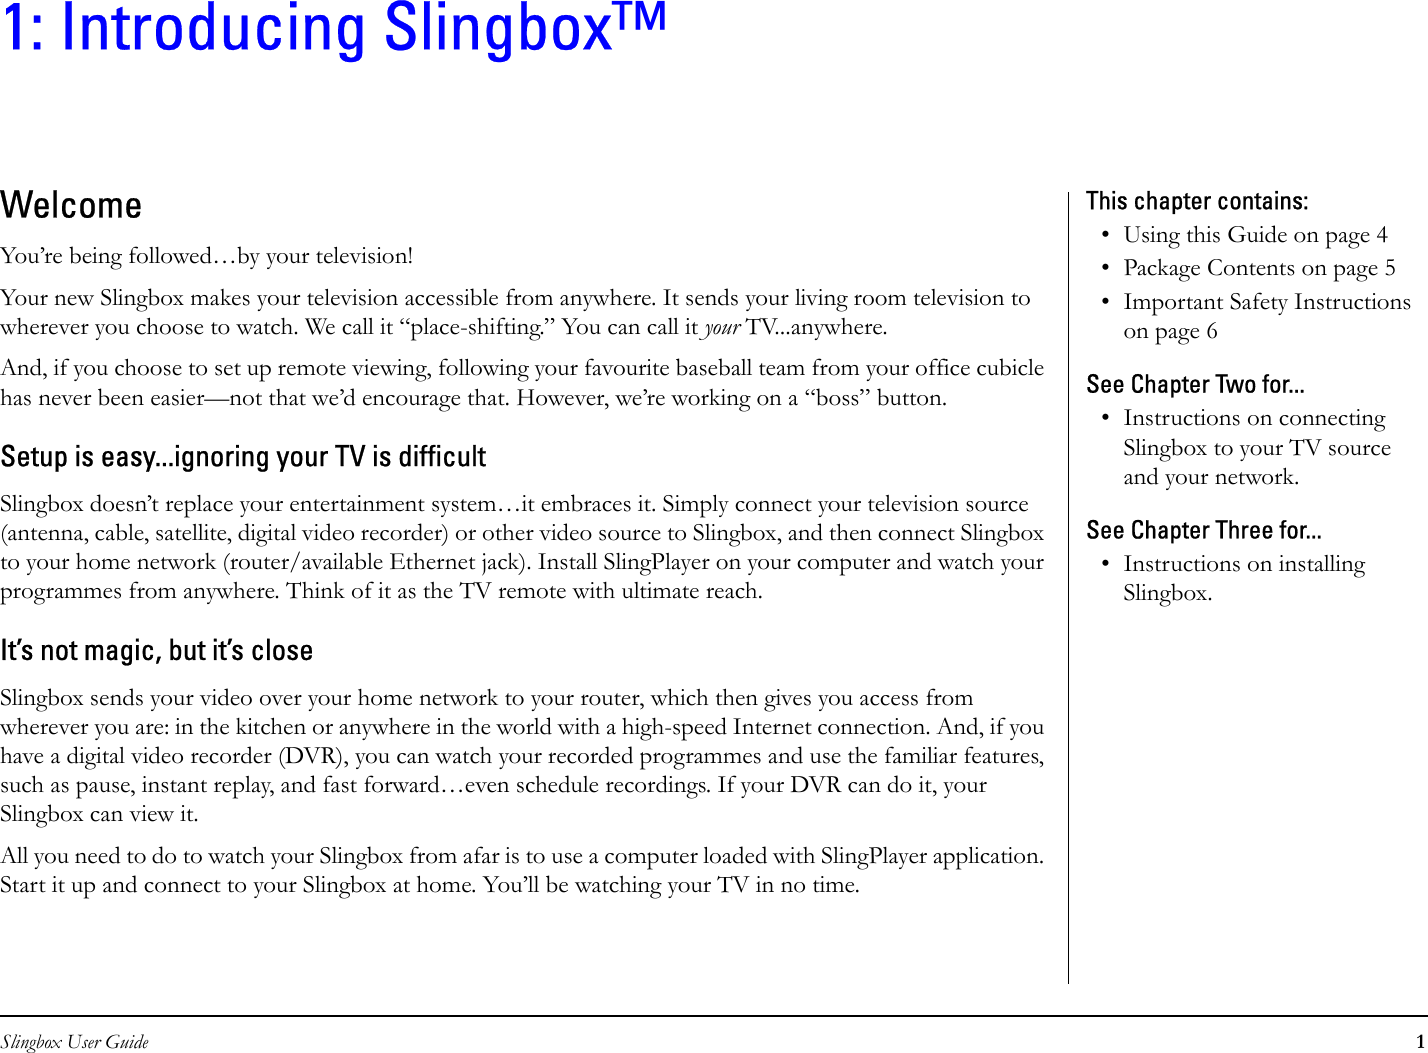 Slingbox User Guide 11: Introducing Slingbox™WelcomeYou’re being followed…by your television!Your new Slingbox makes your television accessible from anywhere. It sends your living room television to wherever you choose to watch. We call it “place-shifting.” You can call it your TV...anywhere.And, if you choose to set up remote viewing, following your favourite baseball team from your office cubicle has never been easier—not that we’d encourage that. However, we’re working on a “boss” button.Setup is easy...ignoring your TV is difficultSlingbox doesn’t replace your entertainment system…it embraces it. Simply connect your television source (antenna, cable, satellite, digital video recorder) or other video source to Slingbox, and then connect Slingbox to your home network (router/available Ethernet jack). Install SlingPlayer on your computer and watch your programmes from anywhere. Think of it as the TV remote with ultimate reach.It’s not magic, but it’s closeSlingbox sends your video over your home network to your router, which then gives you access from wherever you are: in the kitchen or anywhere in the world with a high-speed Internet connection. And, if you have a digital video recorder (DVR), you can watch your recorded programmes and use the familiar features, such as pause, instant replay, and fast forward…even schedule recordings. If your DVR can do it, your Slingbox can view it.All you need to do to watch your Slingbox from afar is to use a computer loaded with SlingPlayer application. Start it up and connect to your Slingbox at home. You’ll be watching your TV in no time.This chapter contains:• Using this Guide on page 4• Package Contents on page 5• Important Safety Instructions on page 6See Chapter Two for...• Instructions on connecting Slingbox to your TV source and your network.See Chapter Three for...• Instructions on installing Slingbox.